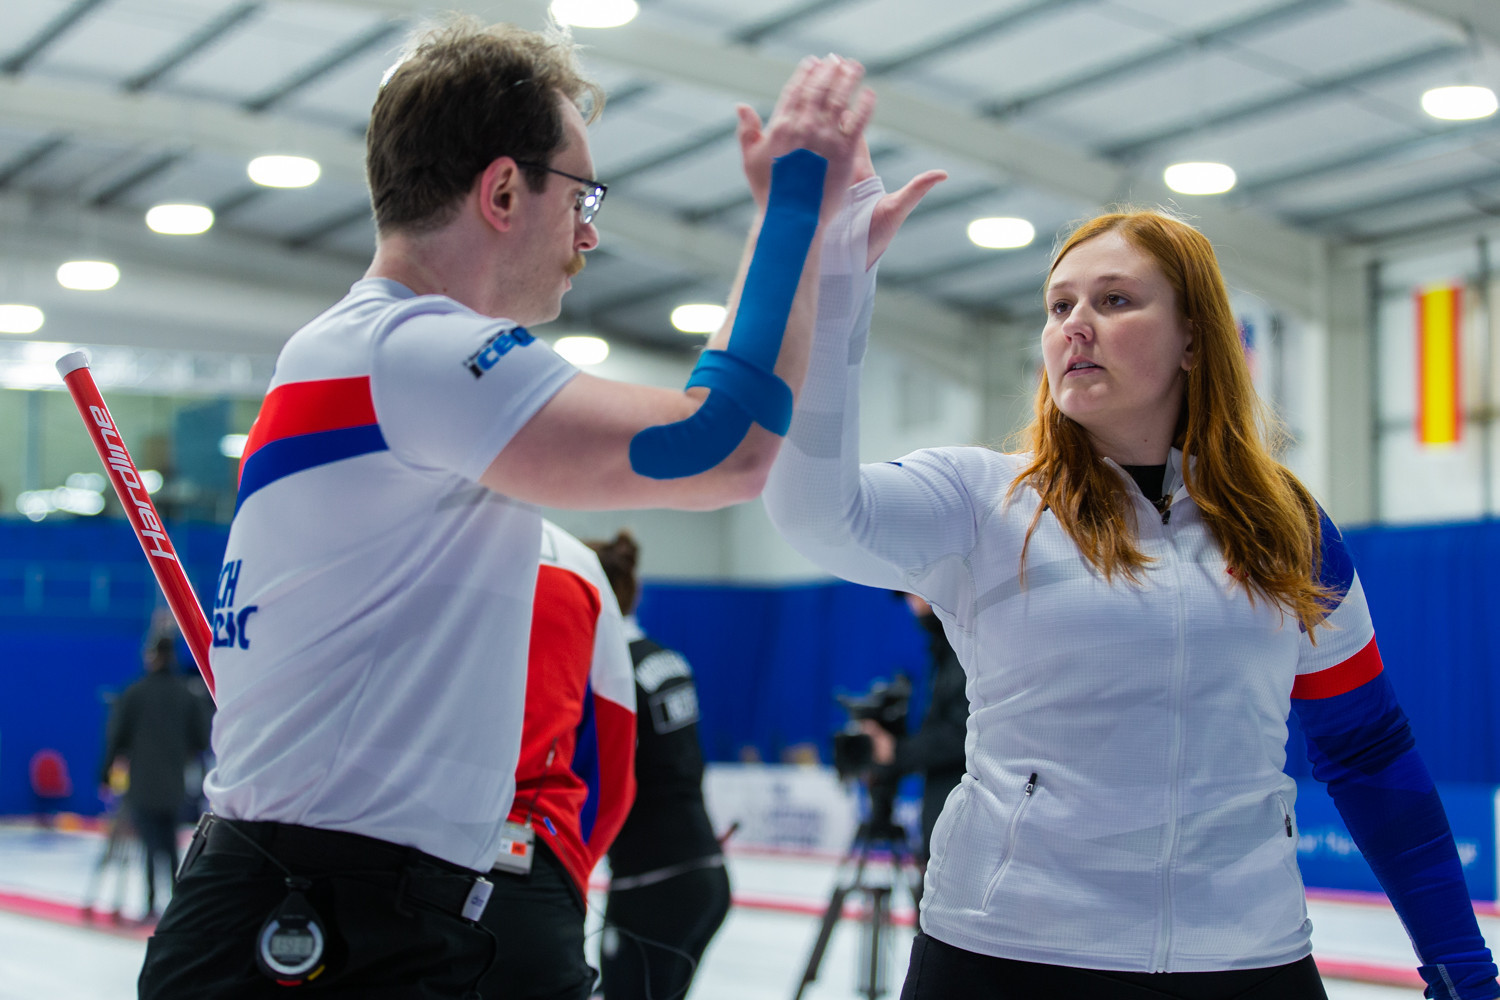 Five teams remain unbeaten following the third day of action at the World Mixed Doubles Curling Championship ©WCF/Celine Stucki